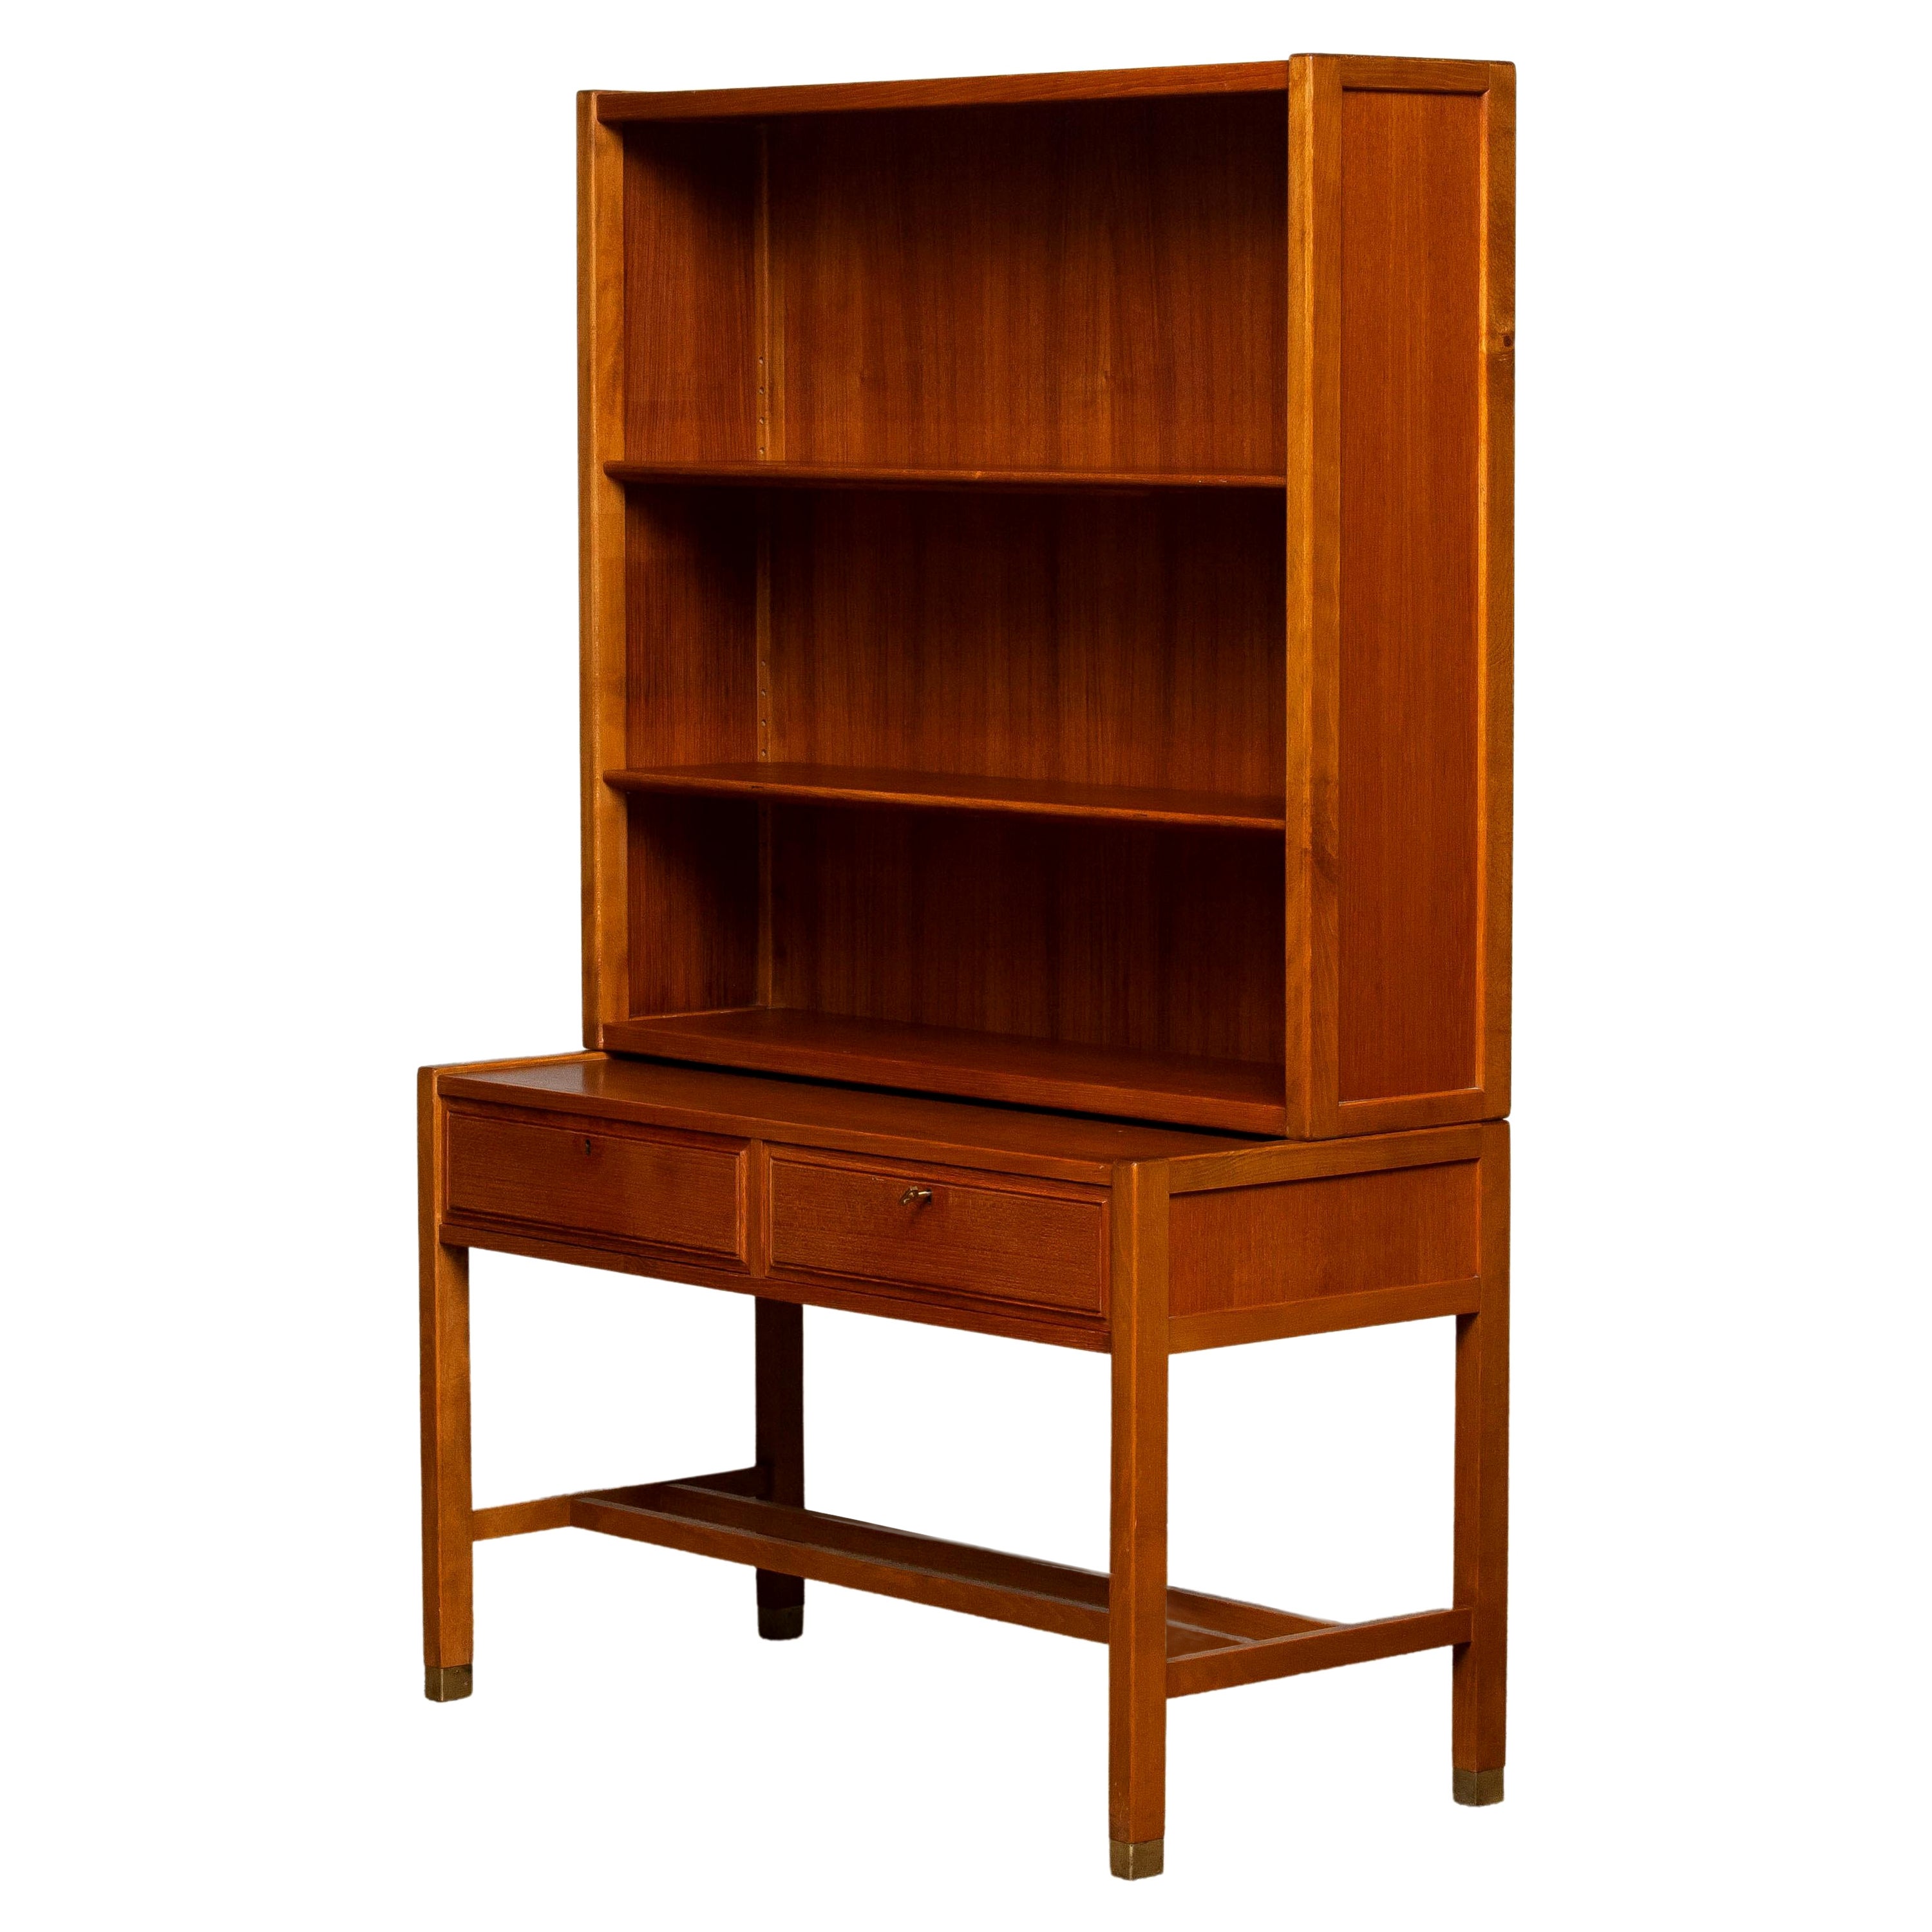 1960s Teak Drawer and Shelfs Cabinet by Carl Axel Acking for Bodafors, Sweden For Sale